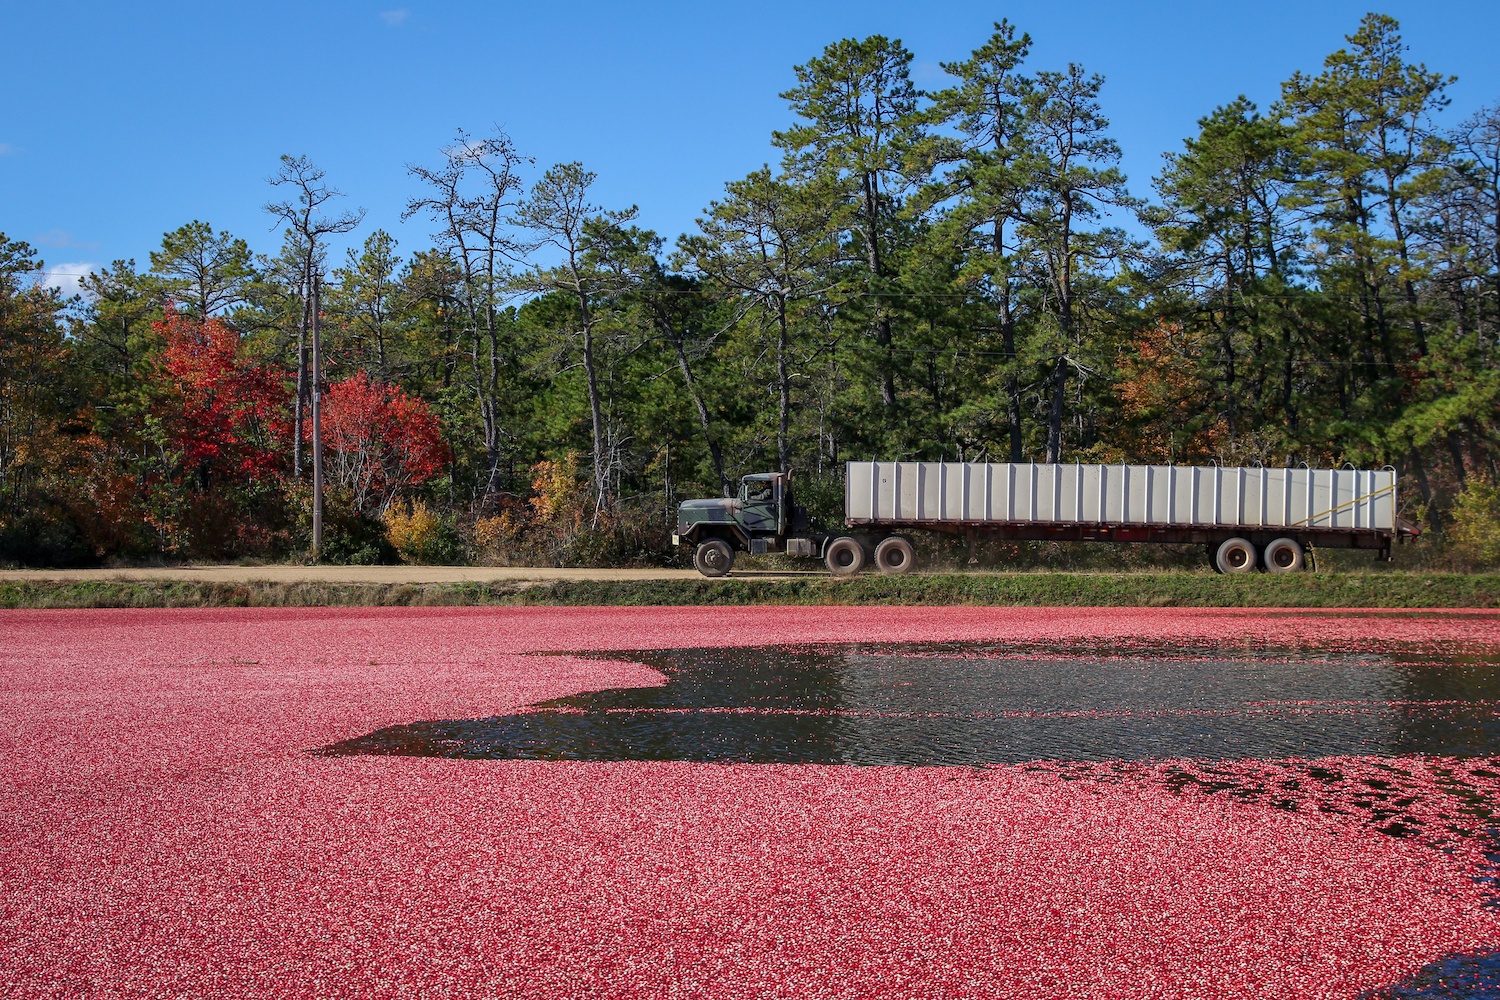 Cranberries in a bog that will soon be corralled and then vacuumed into a truck